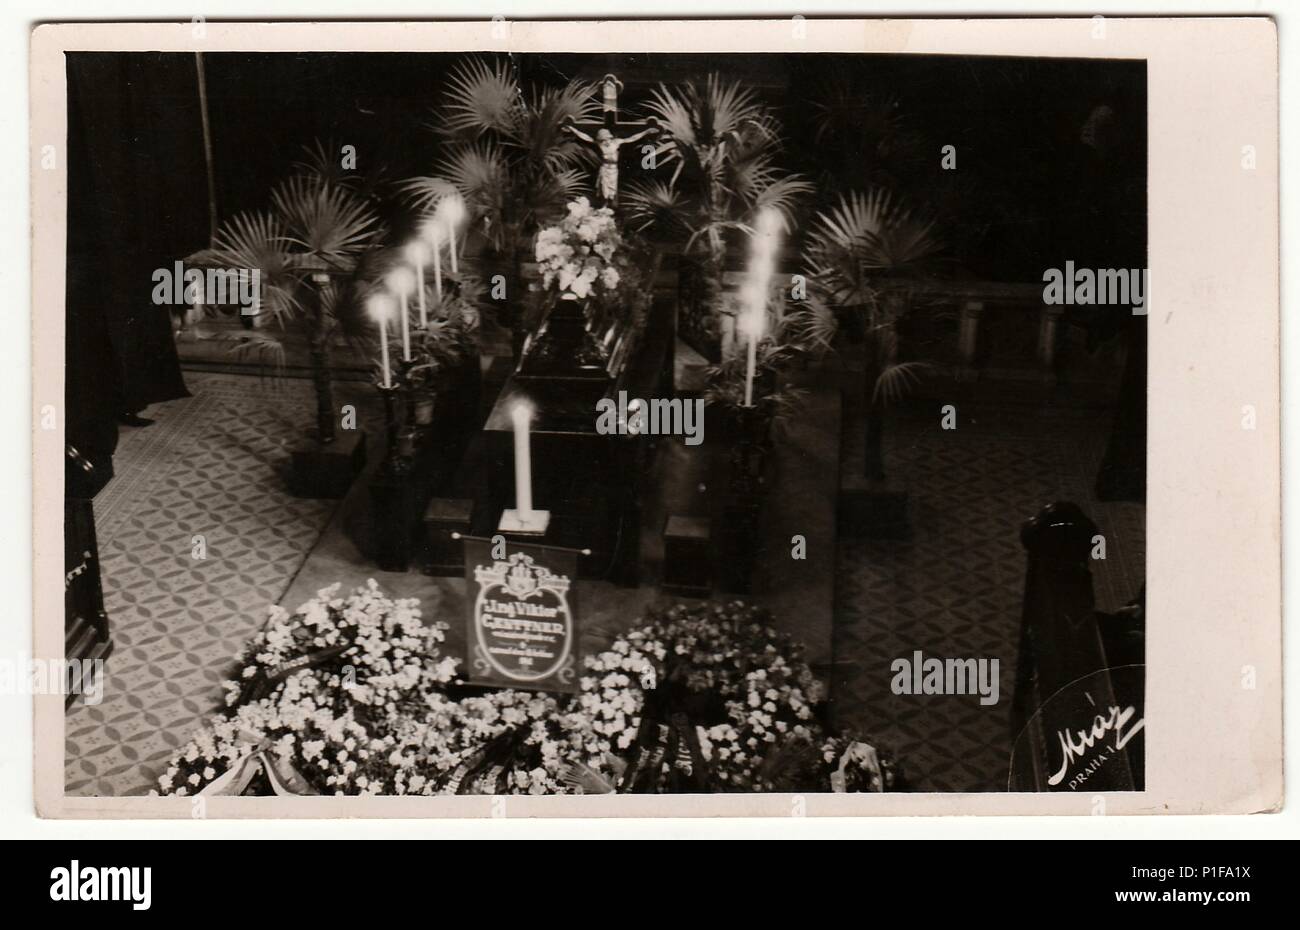 PRAGUE, THE CZECHOSLOVAK REPUBLIC - MAY 23, 1940: Vintage photo shows funeral before cremation. Antique black & white photo. Stock Photo